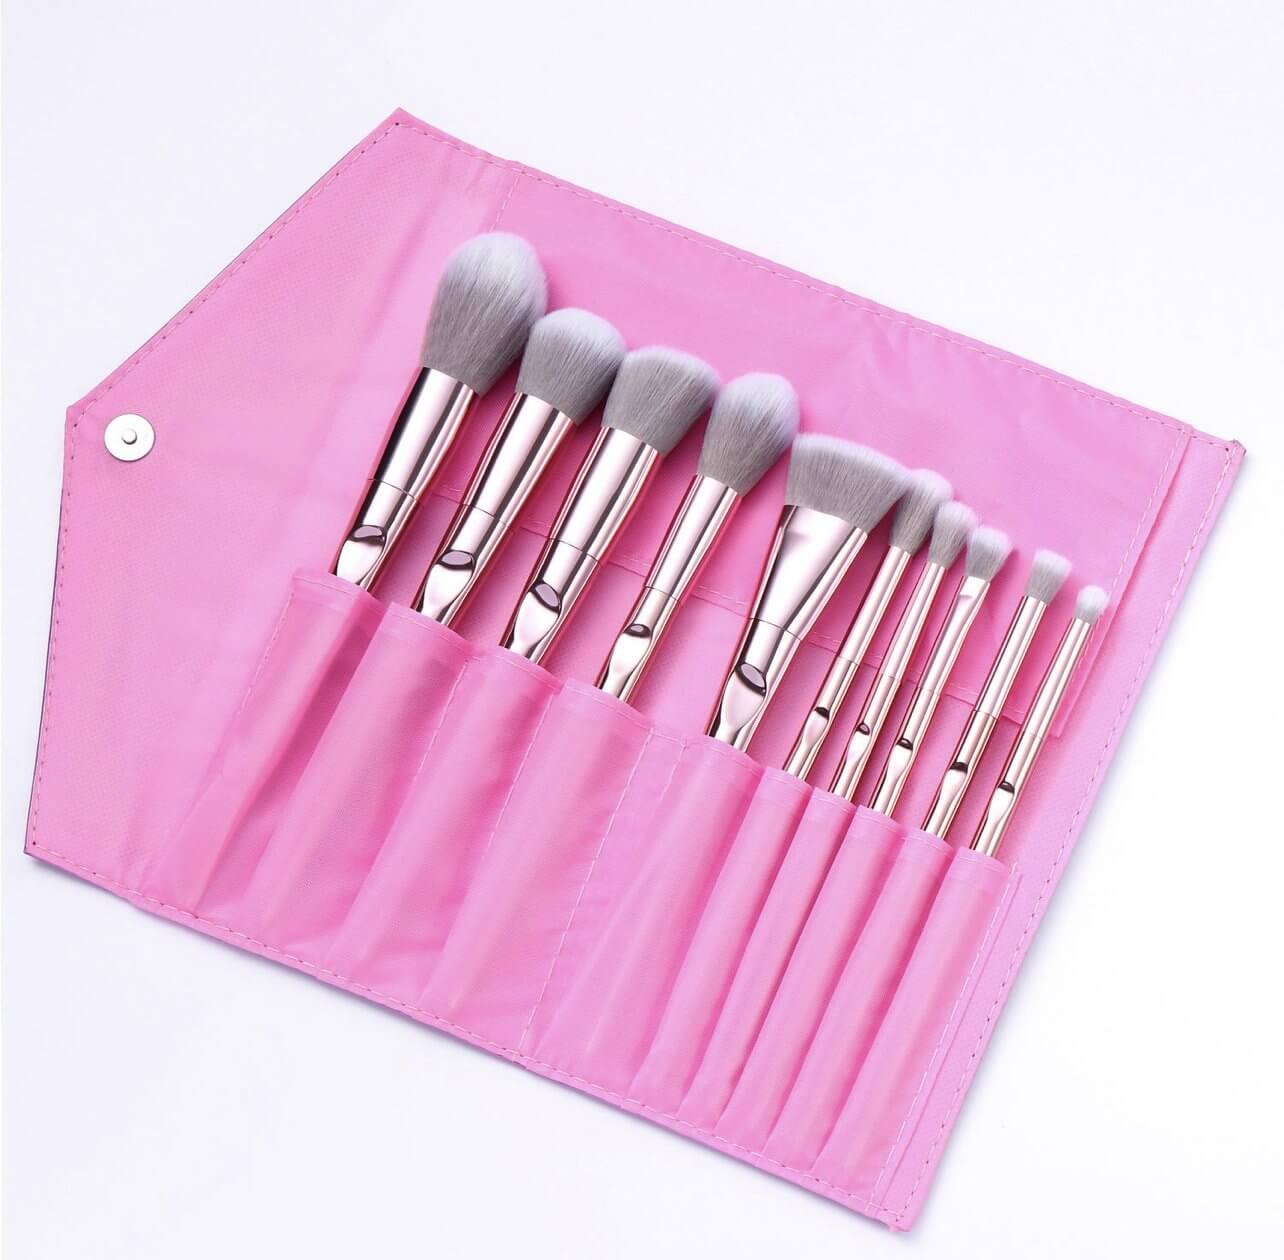 !0 pc. Pink Makeup Brushes fitted inside Pink Clutch